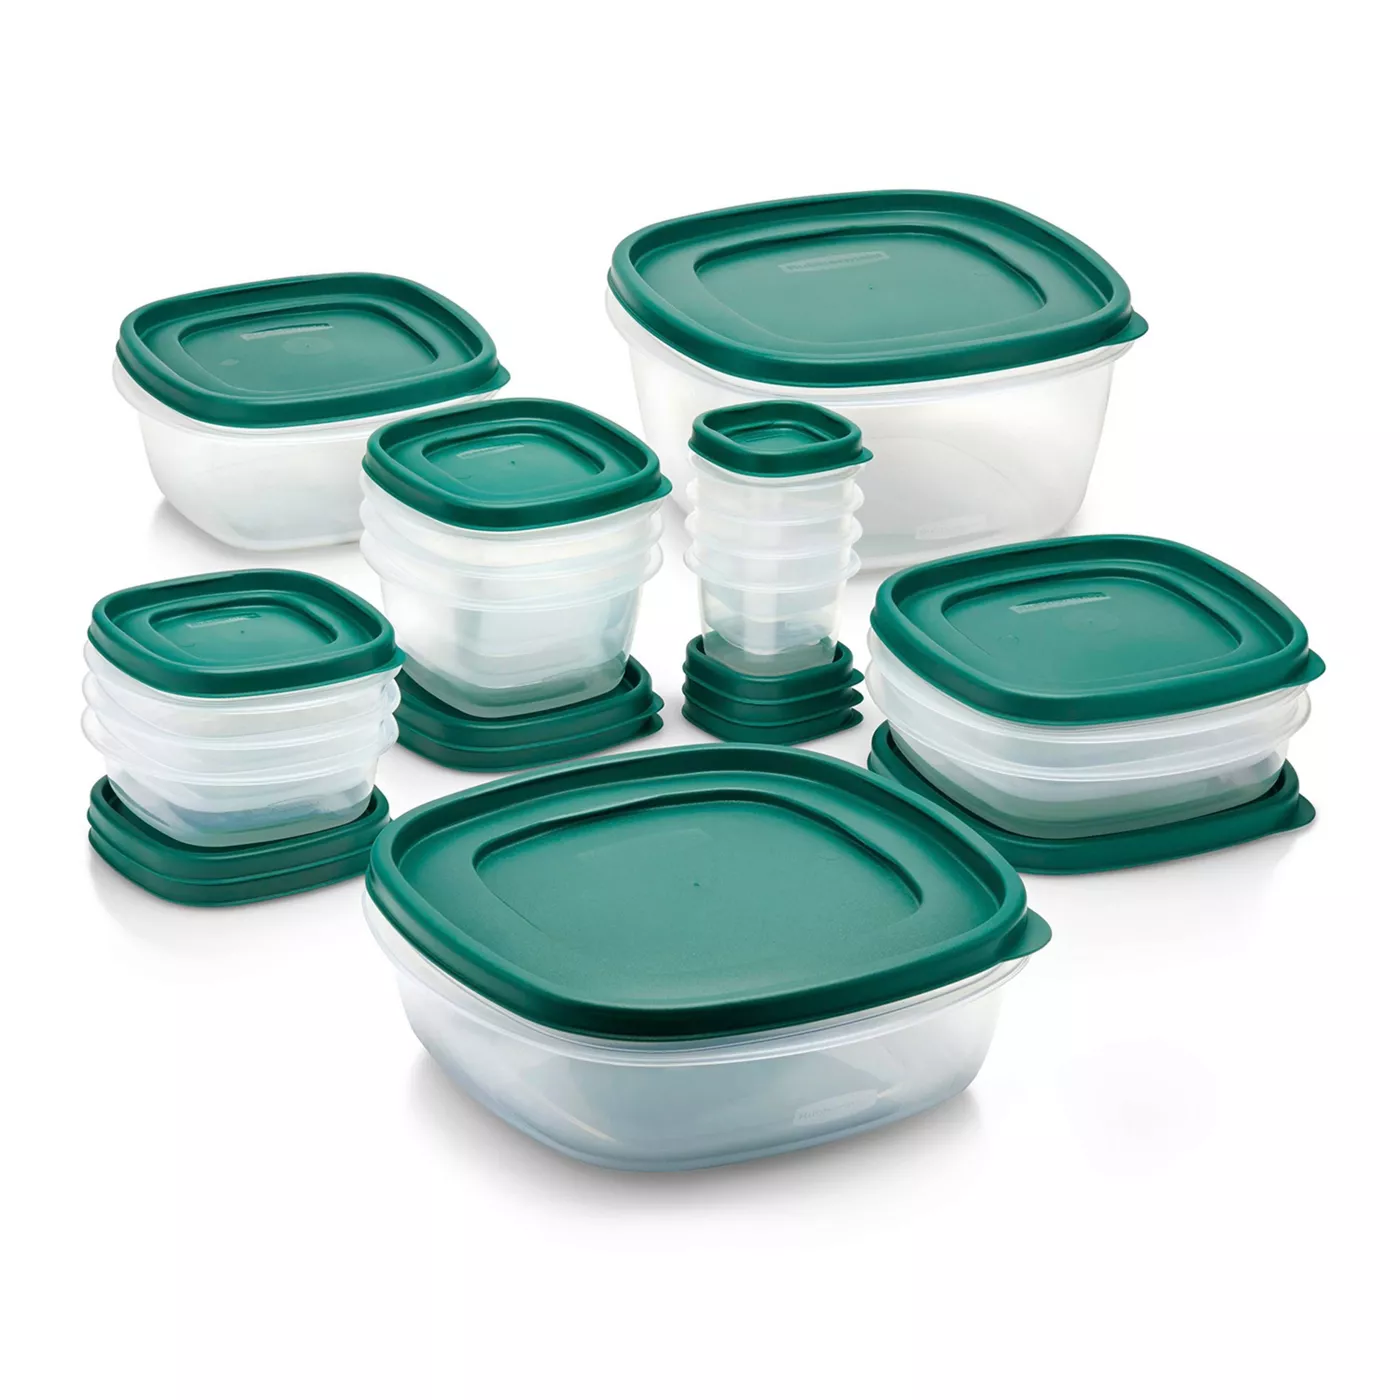 Rubbermaid 30pc Food Storage Container Set 80% Savings Black Friday Deal